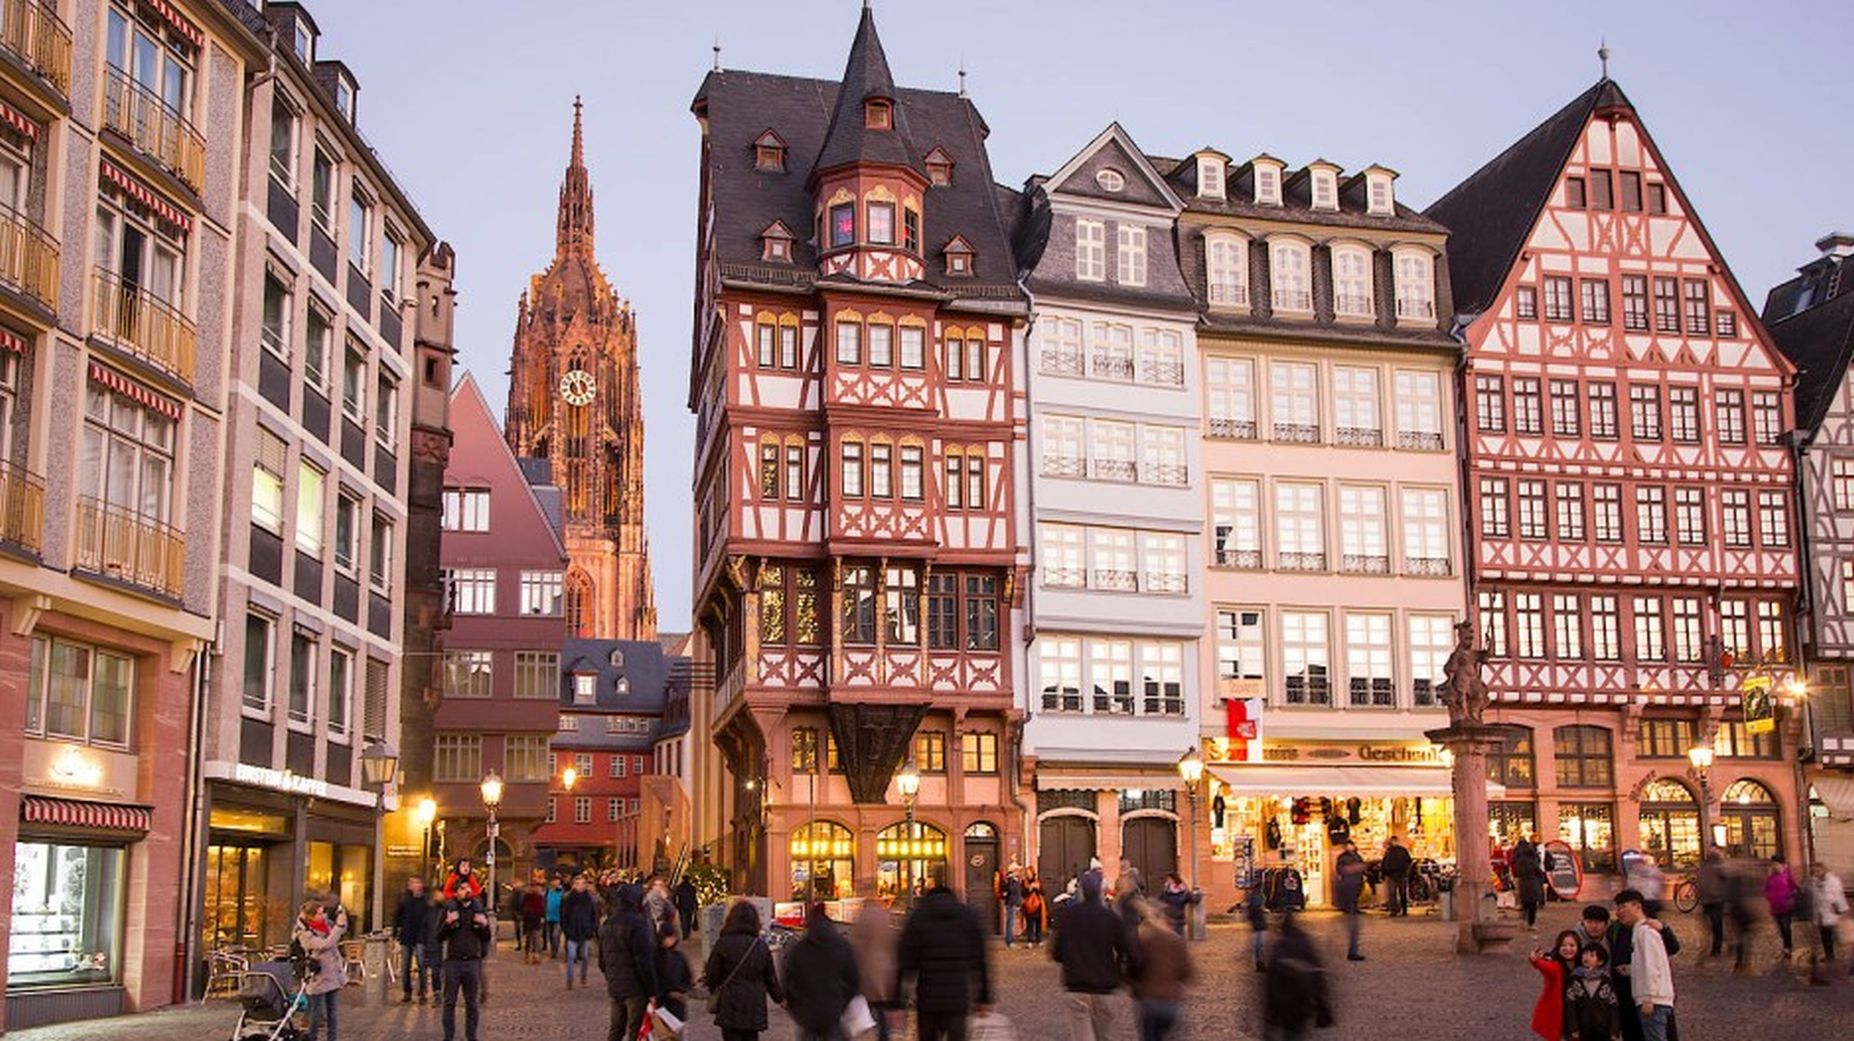 What to see and do in Frankfurt